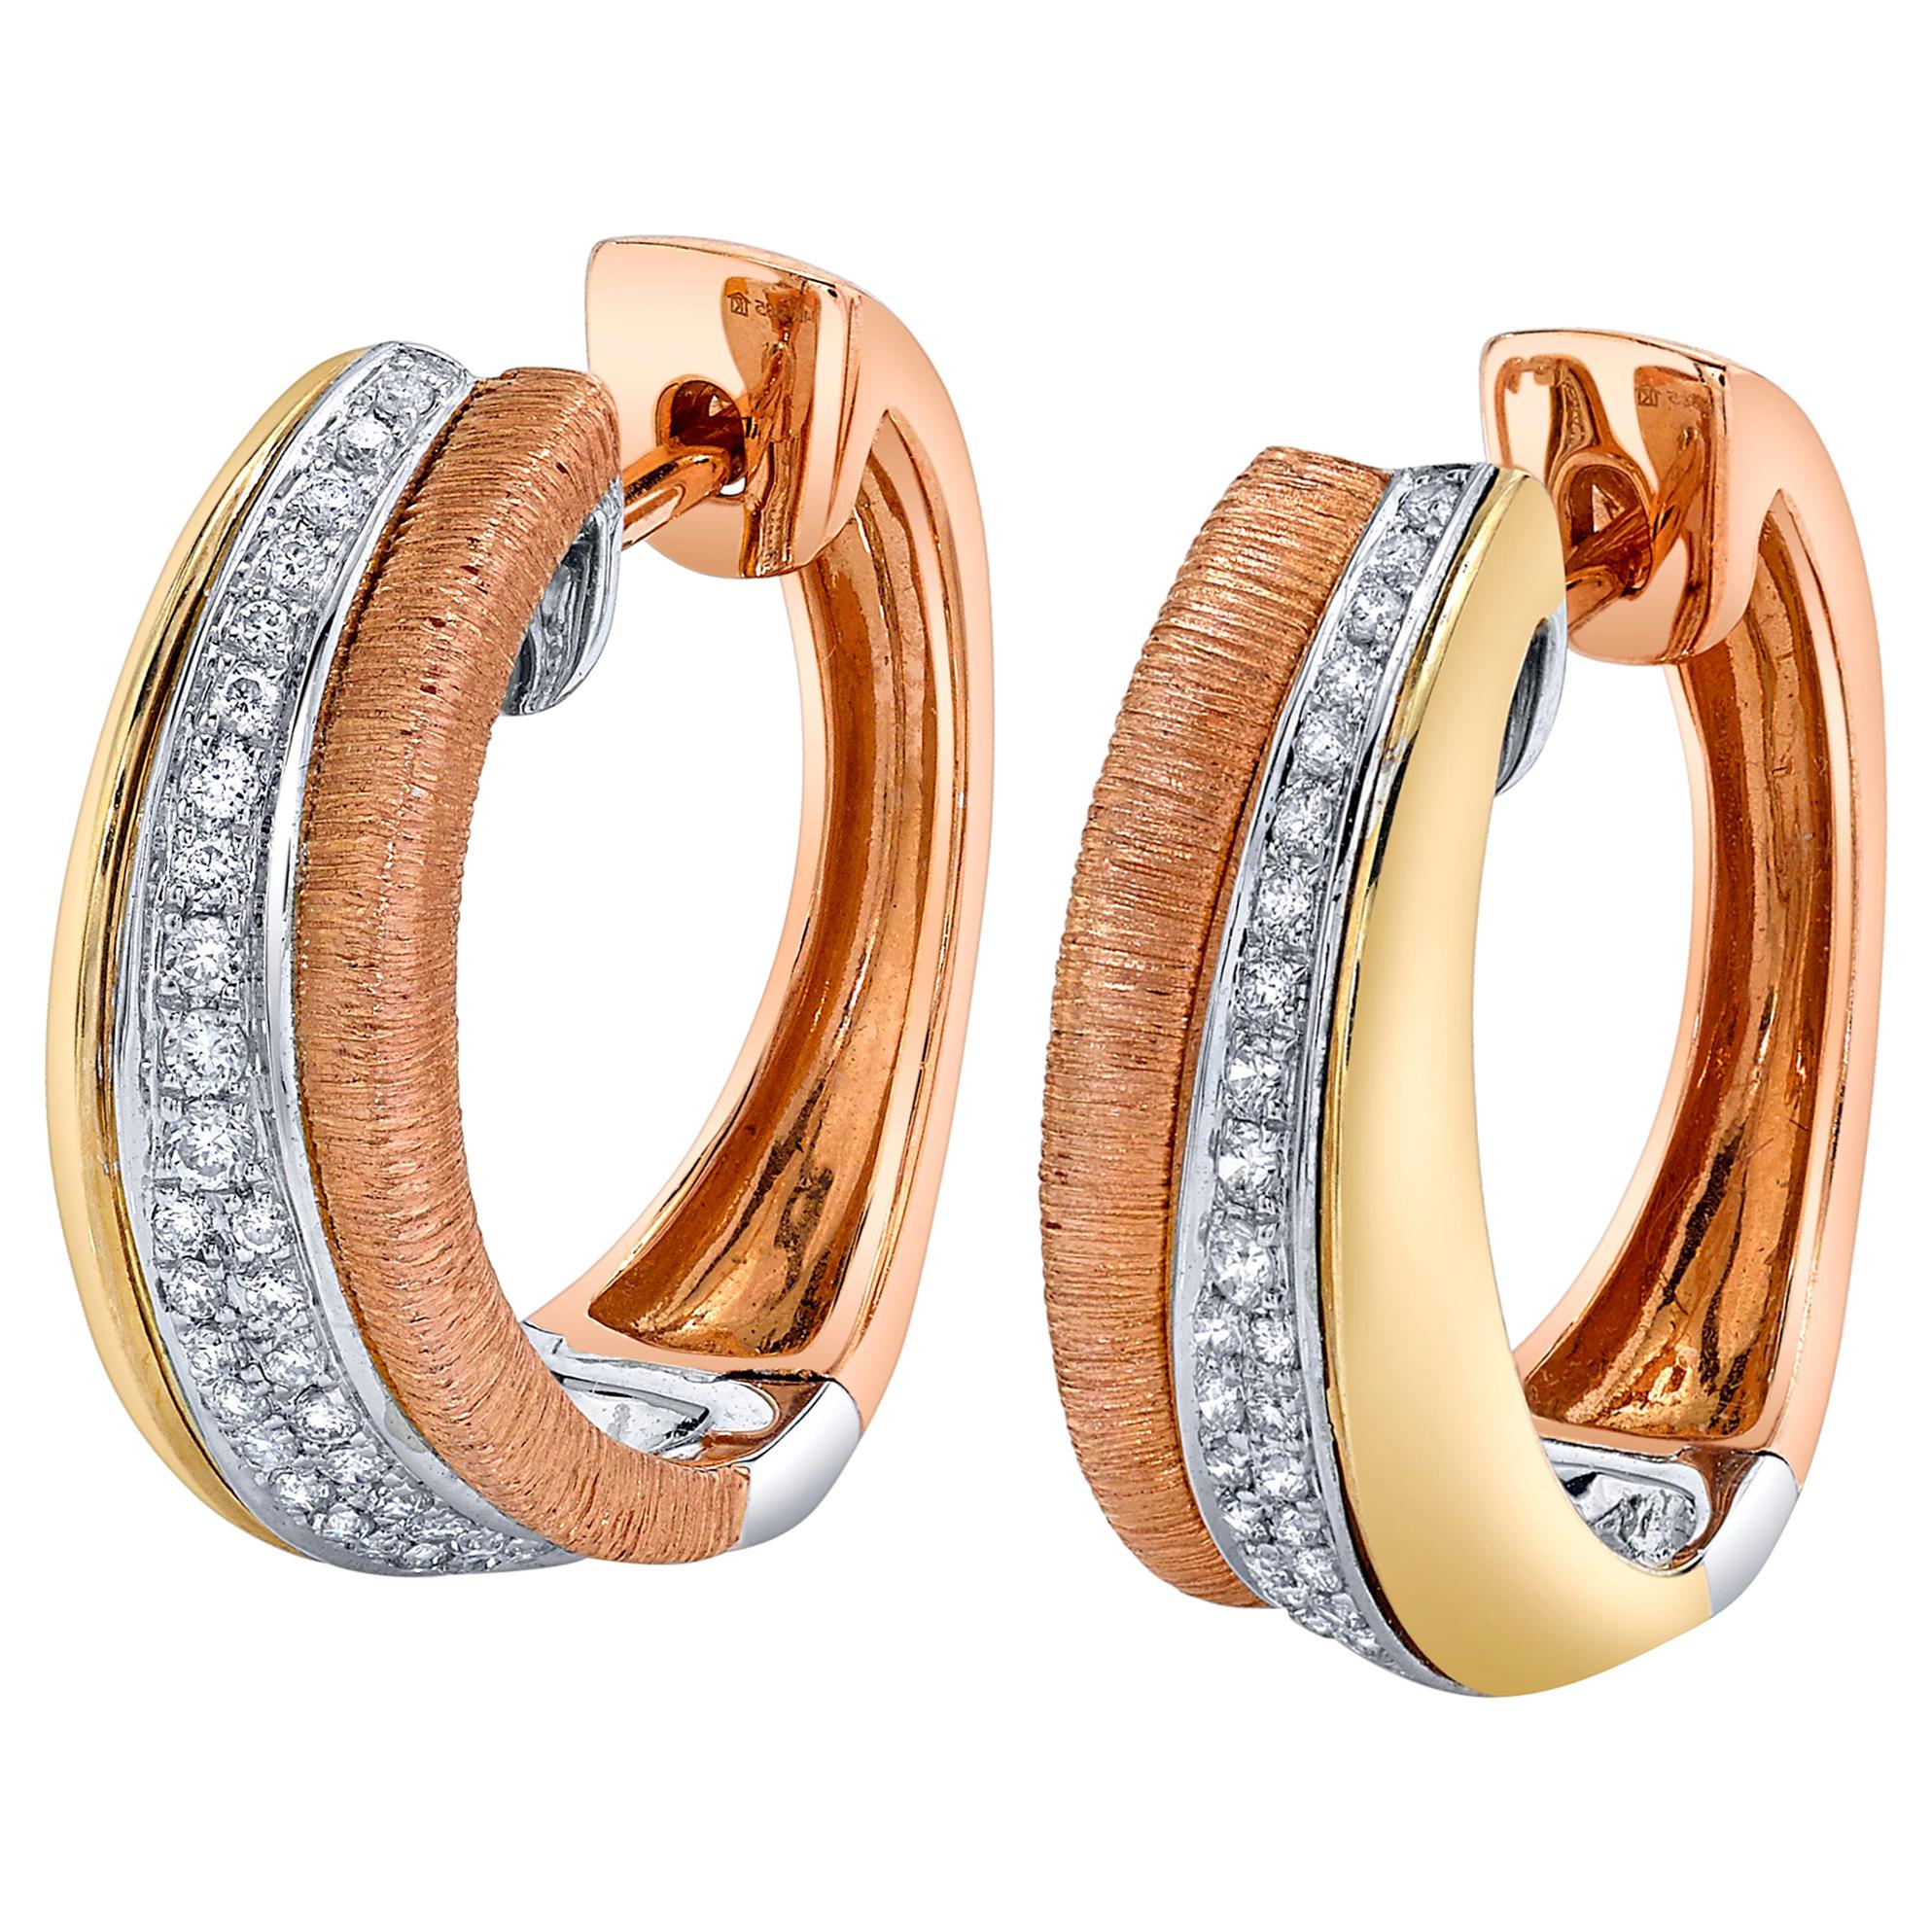 Diamond Pave Tricolor Hoop Earrings in 14k Rose, White and Yellow Gold 